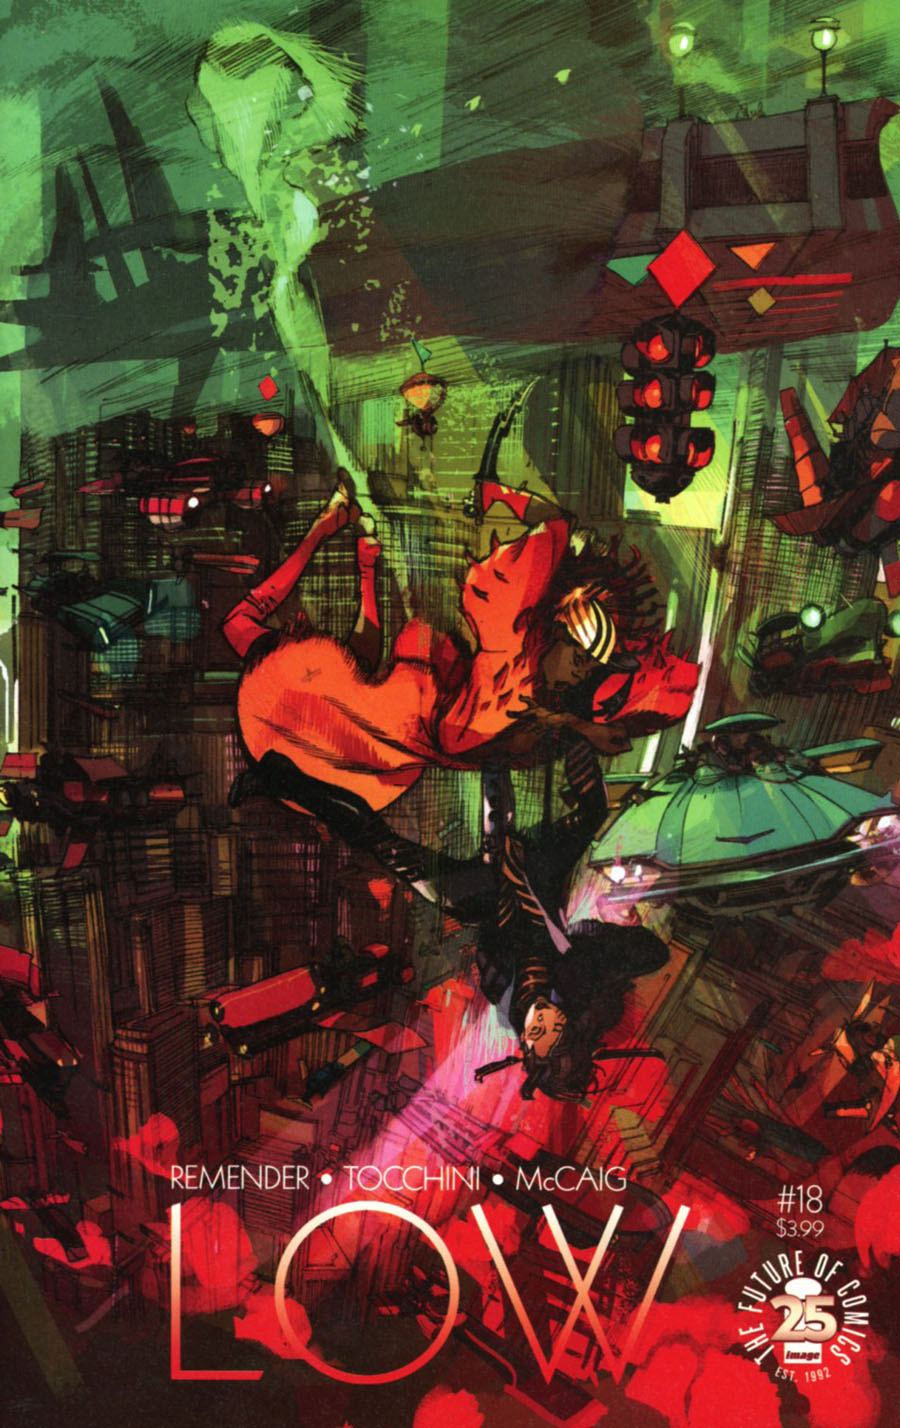 Low #18 Cover A Greg Tocchini & Dave McCaig